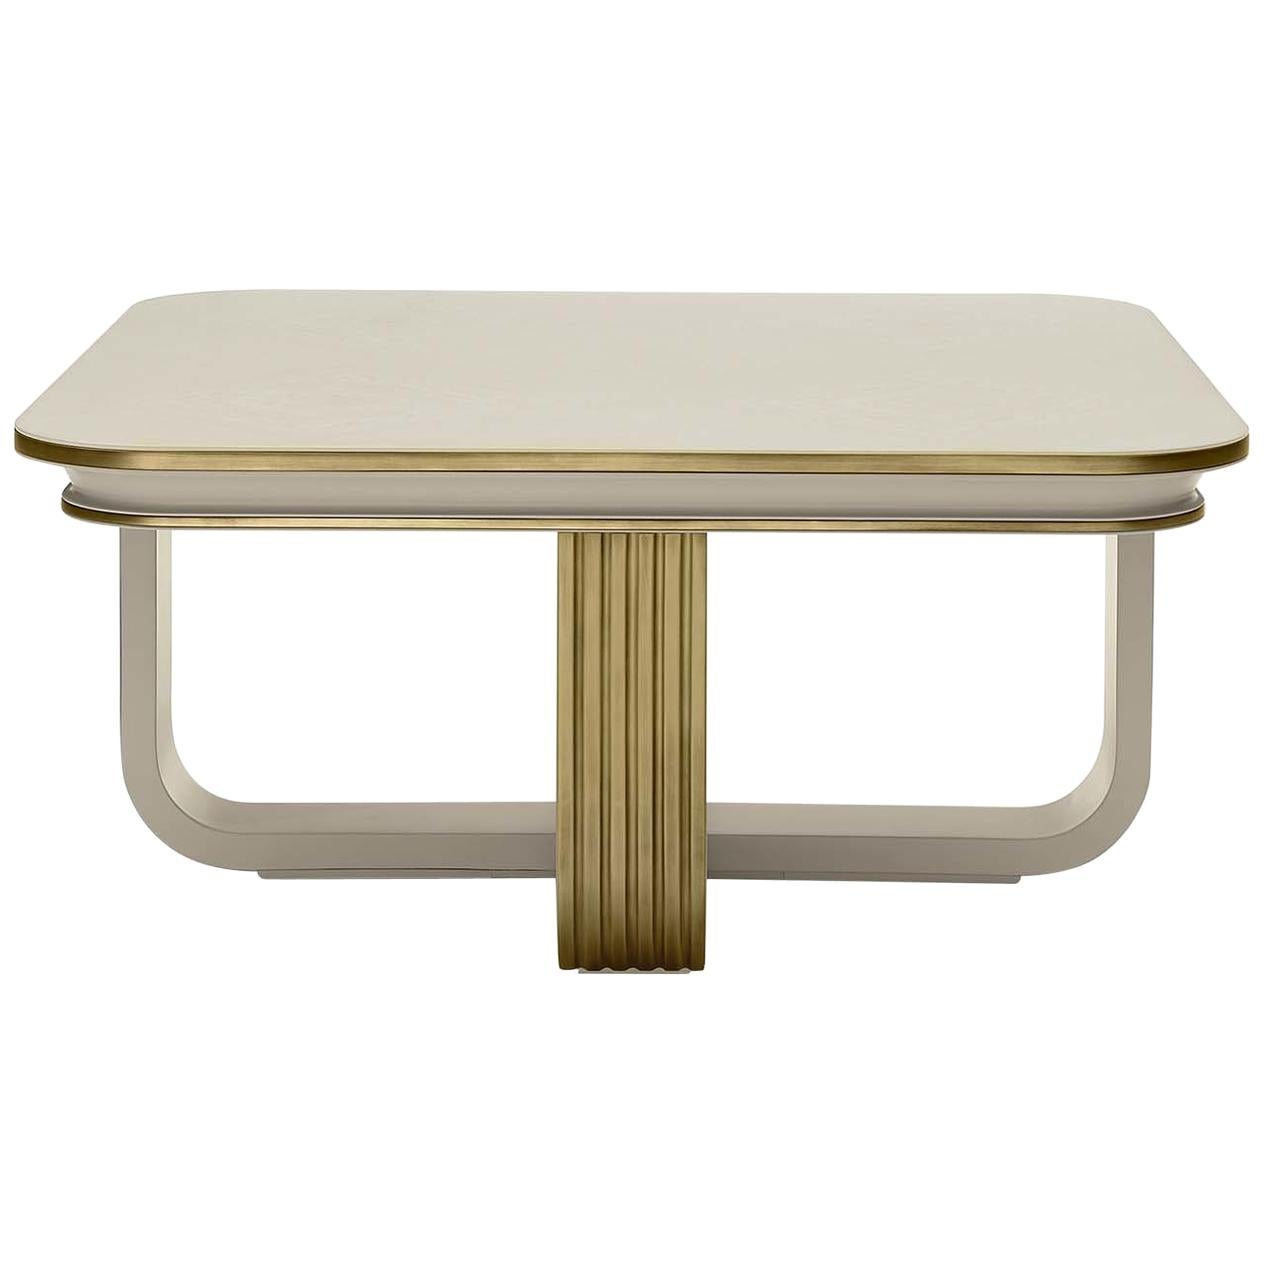 White and Gold Square Coffee Table